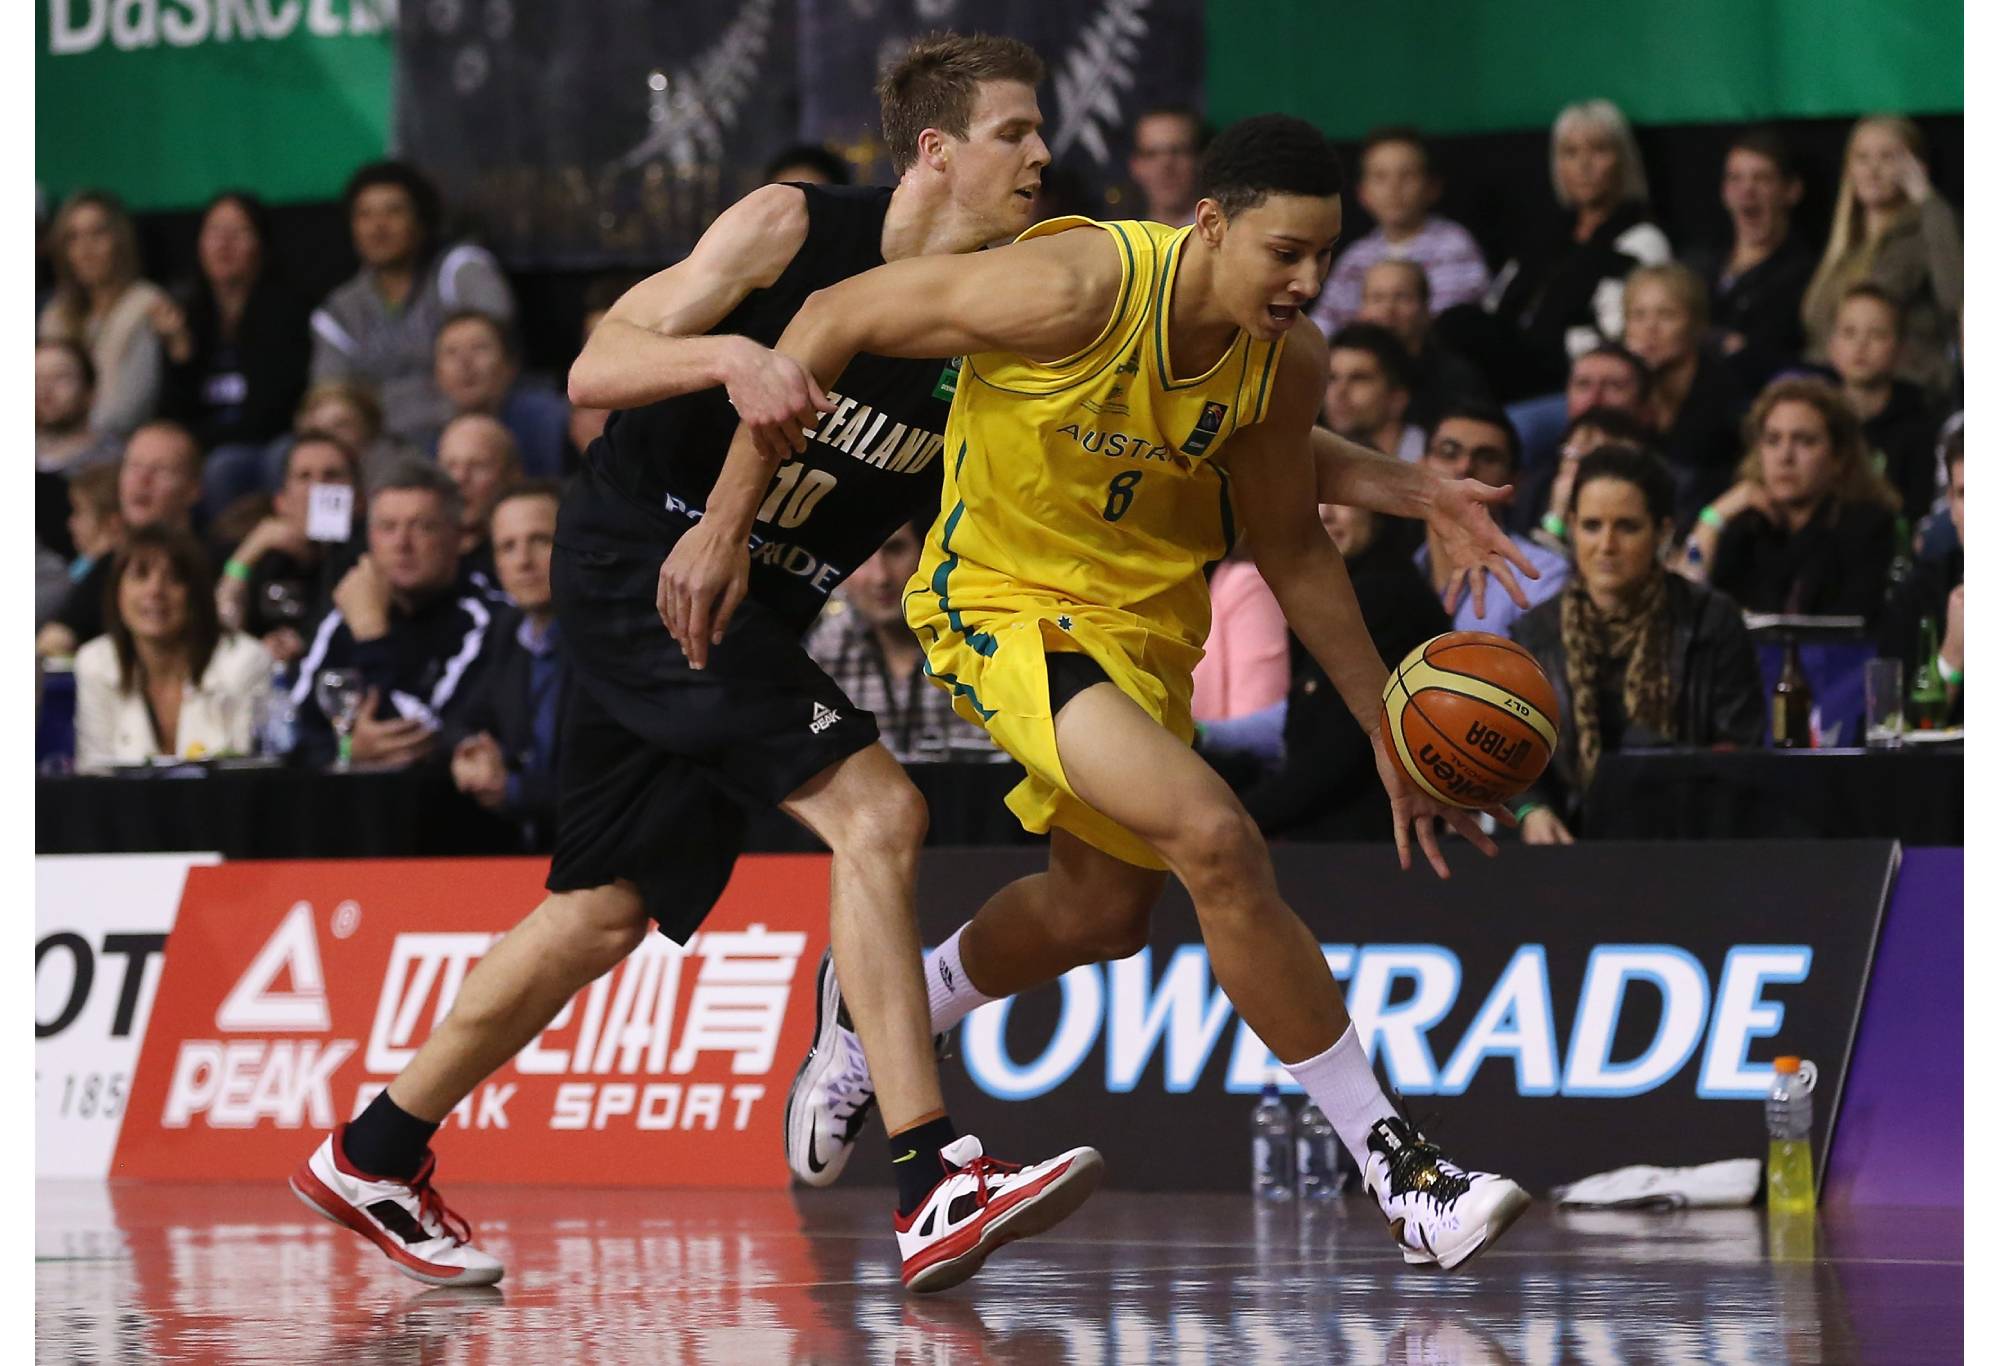 AUCKLAND, NEW ZEALAND - AUGUST 14: Tom Abercrombie of New Zealand (L) and Ben Simmons of Australia in action during the Men's FIBA Oceania Championship match between the New Zealand Tall Blacks and the Australian Boomers at North Shore Events Centre on August 14, 2013 in Auckland, New Zealand. (Photo by Sandra Mu/Getty Images)